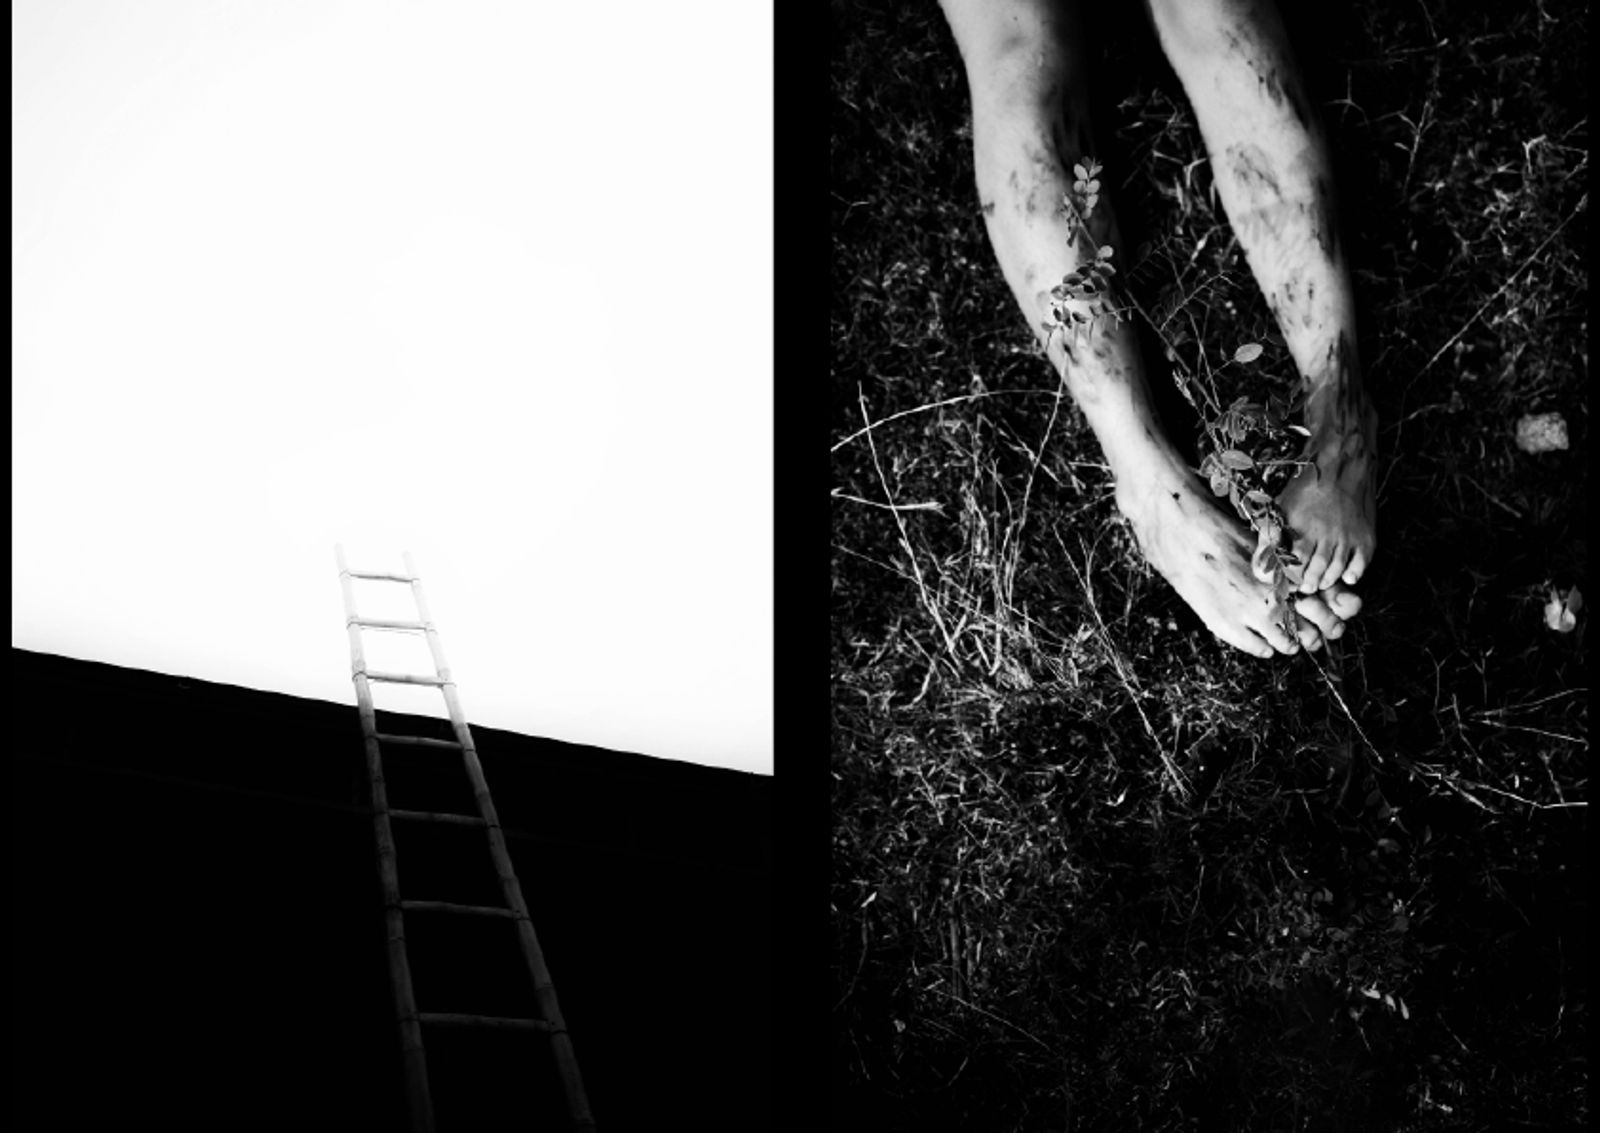 © Mien-Thuy Tran - Image from the Rootless photography project